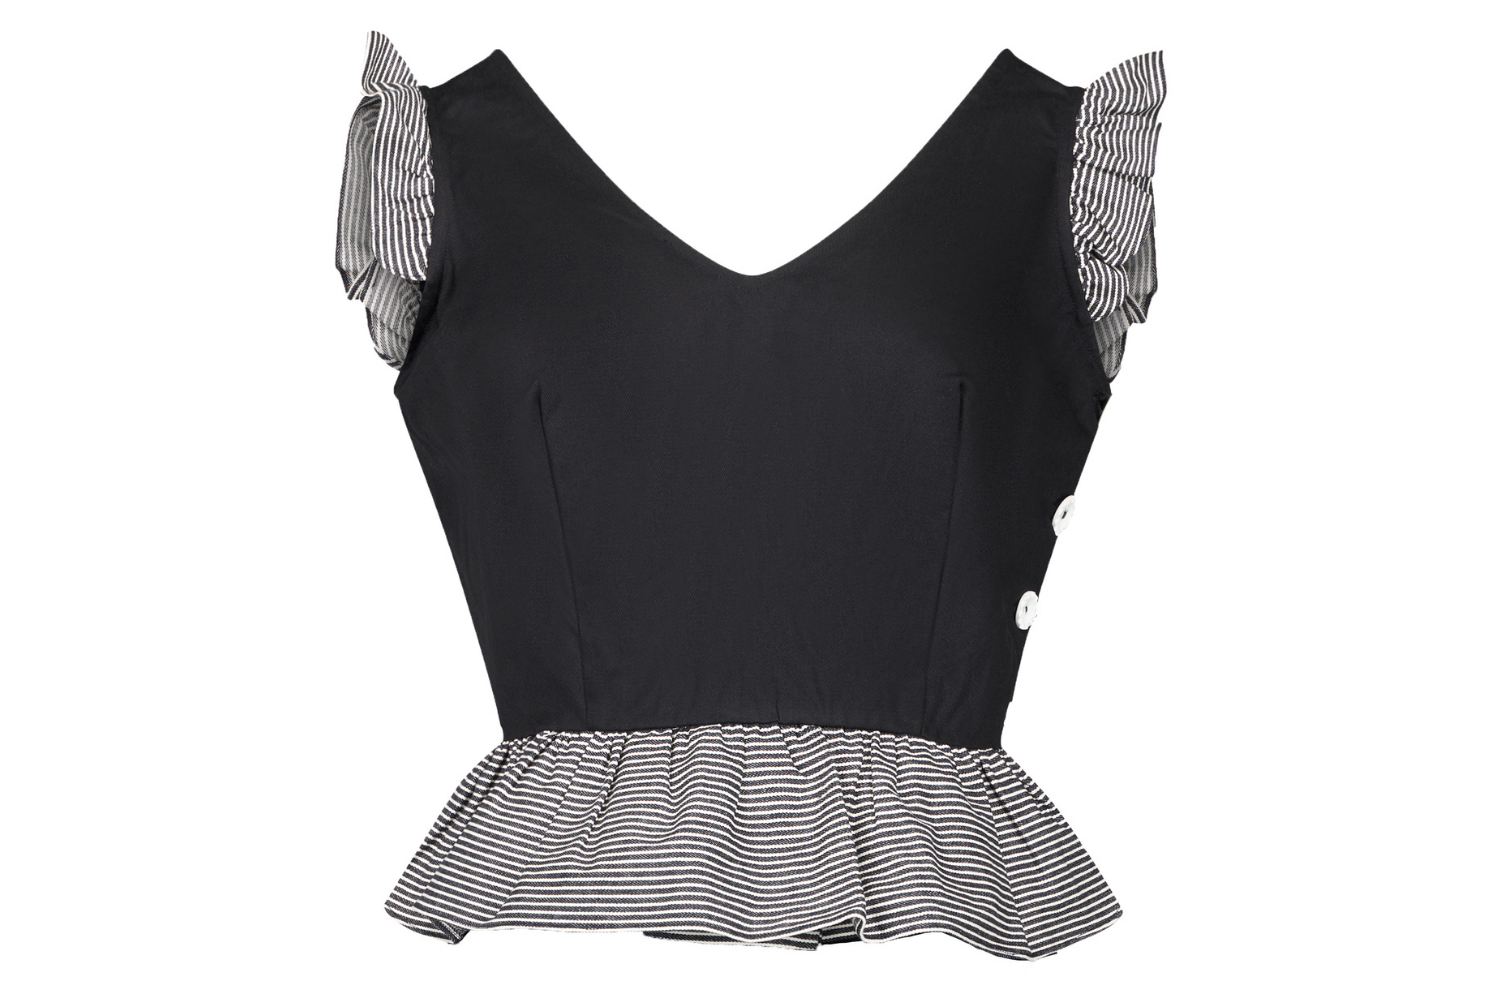 Florence Fluttering Peplum Top in Black with Stripe Detail